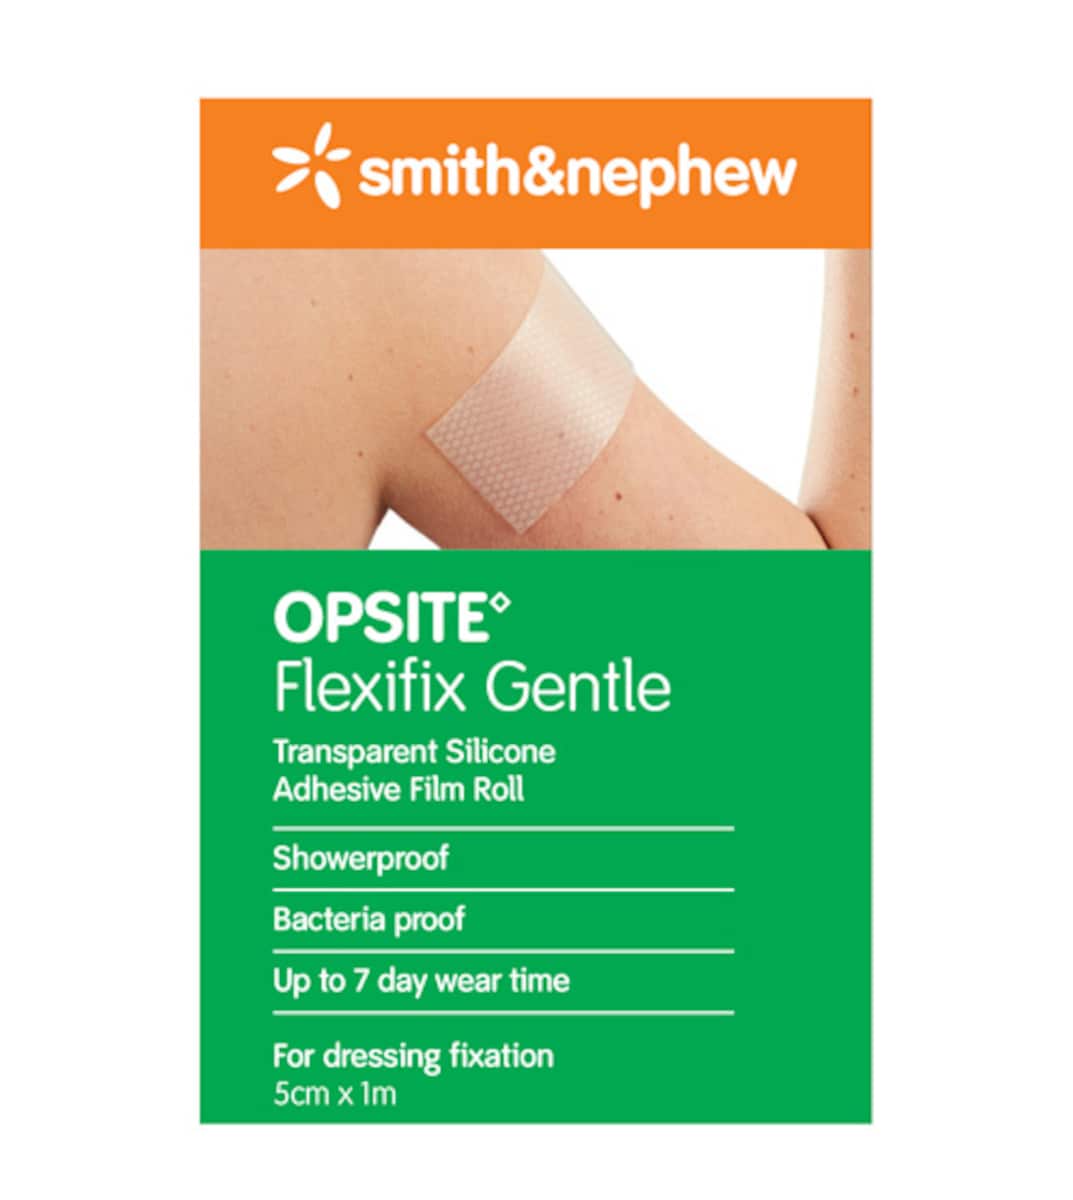 Opsite Flexifix Gentle Transparent Silicone Adhesive Film Roll 5cm x 1m by Smith & Nephew